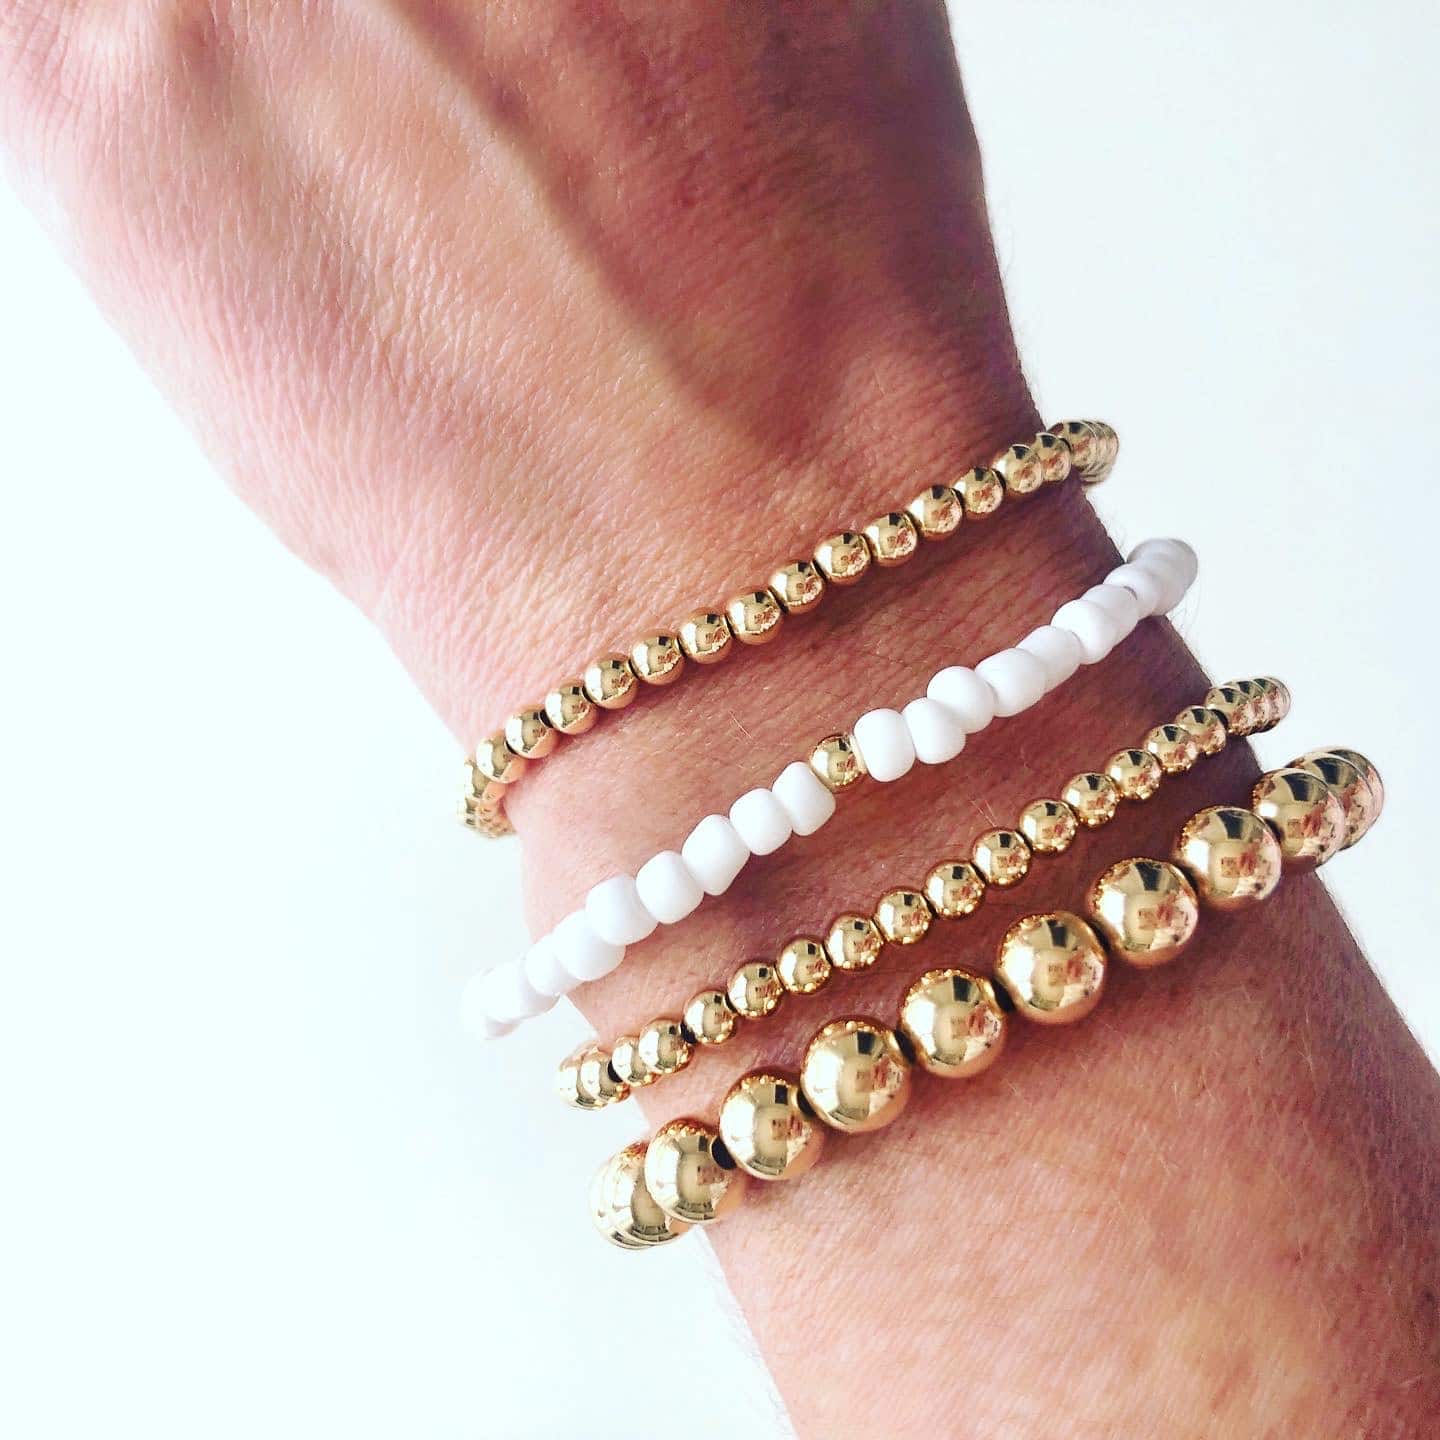 White Summer Bracelet with gold or silver accent